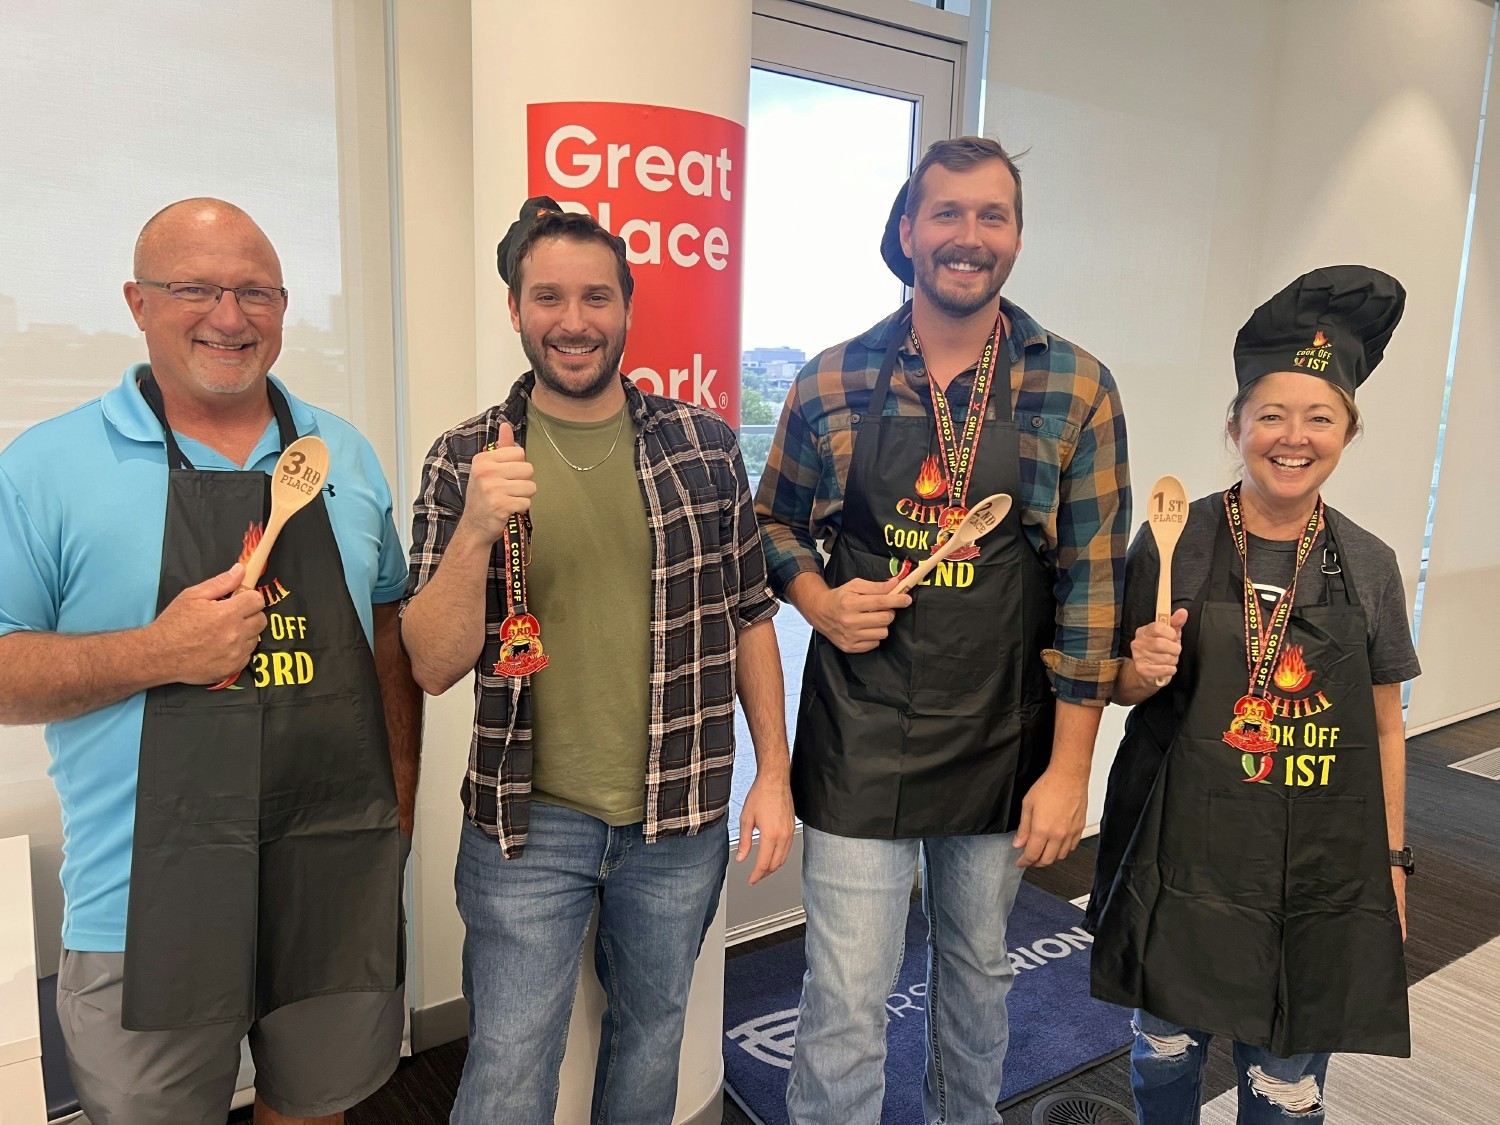 We hosted a Chili-Cook Off and people got to vote on their favorite one. Here are the chili cook-off champions!  